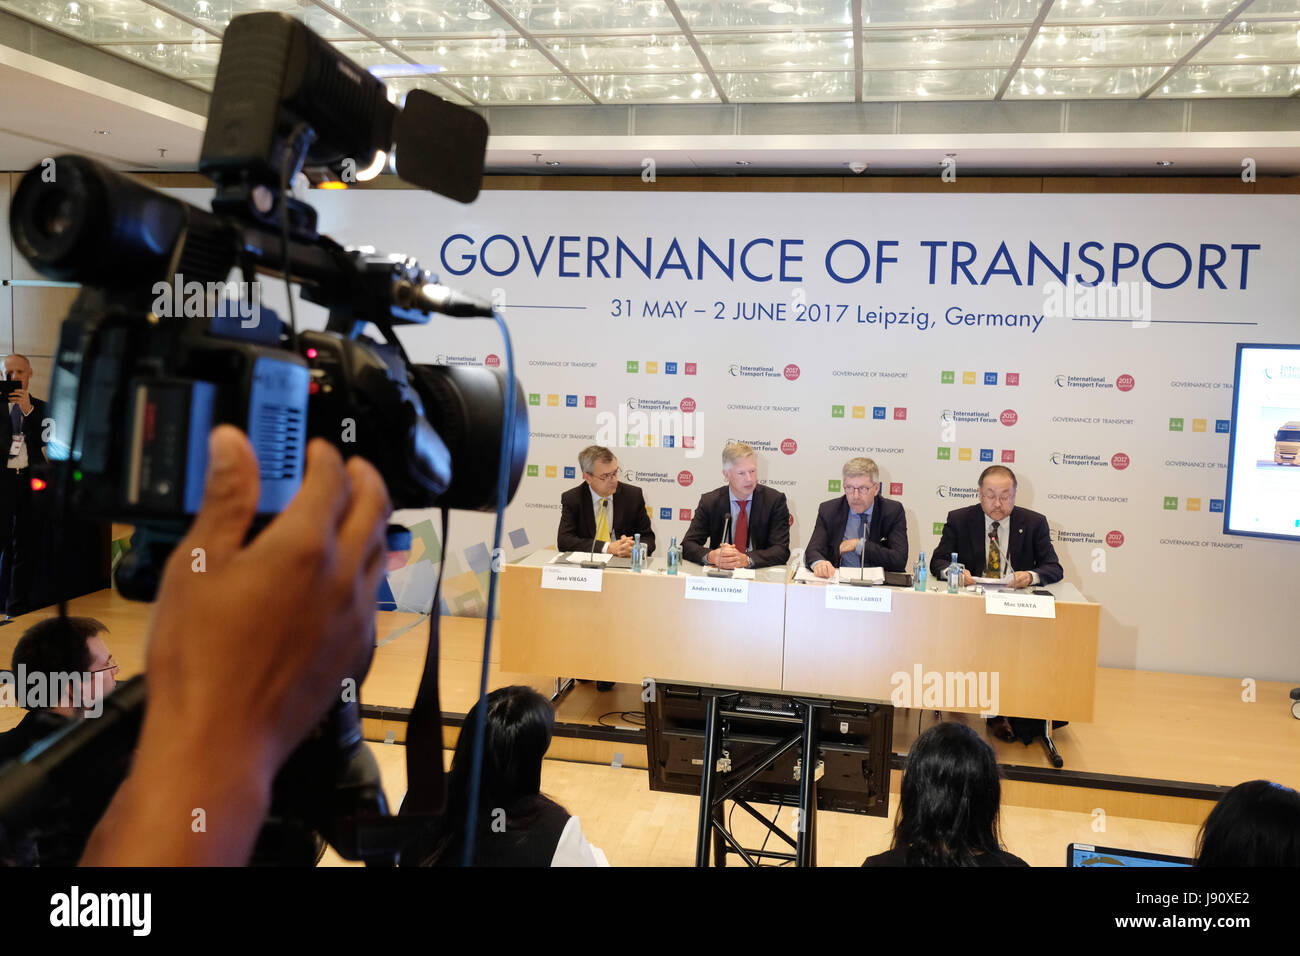 Leipzig, Germany. 31st May, 2017. Jose Viegas (l-r), Secretary General of the International Transport Forum, Anders Kellstroem of the European Automobile Manufacturers Association, Christian Labrot, President of the International Road Transport Union, and Mac Urata of the International Transport Workers Federation participate in a press conference on the International Transport Forum at the Congress Center in Leipzig, Germany, 31 May 2017. More than 1,200 participants from 70 nations are expected in Leipzig from 31 May to 2 June 2017. Credit: dpa picture alliance/Alamy Live News Stock Photo